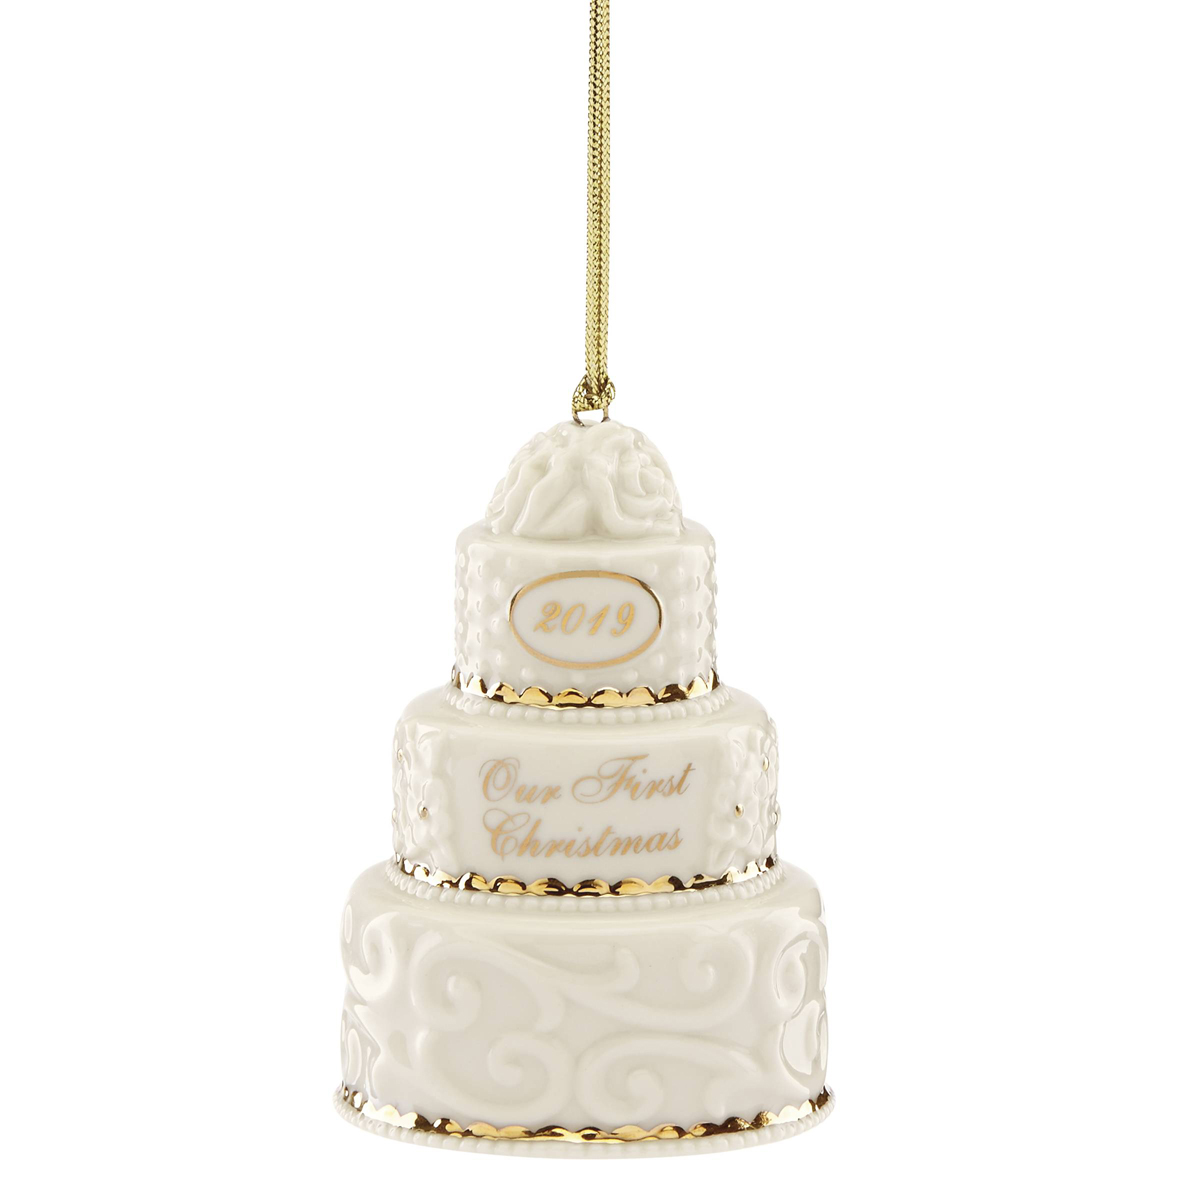 Lenox 2019 Our First Christmas Together Cake Ornament